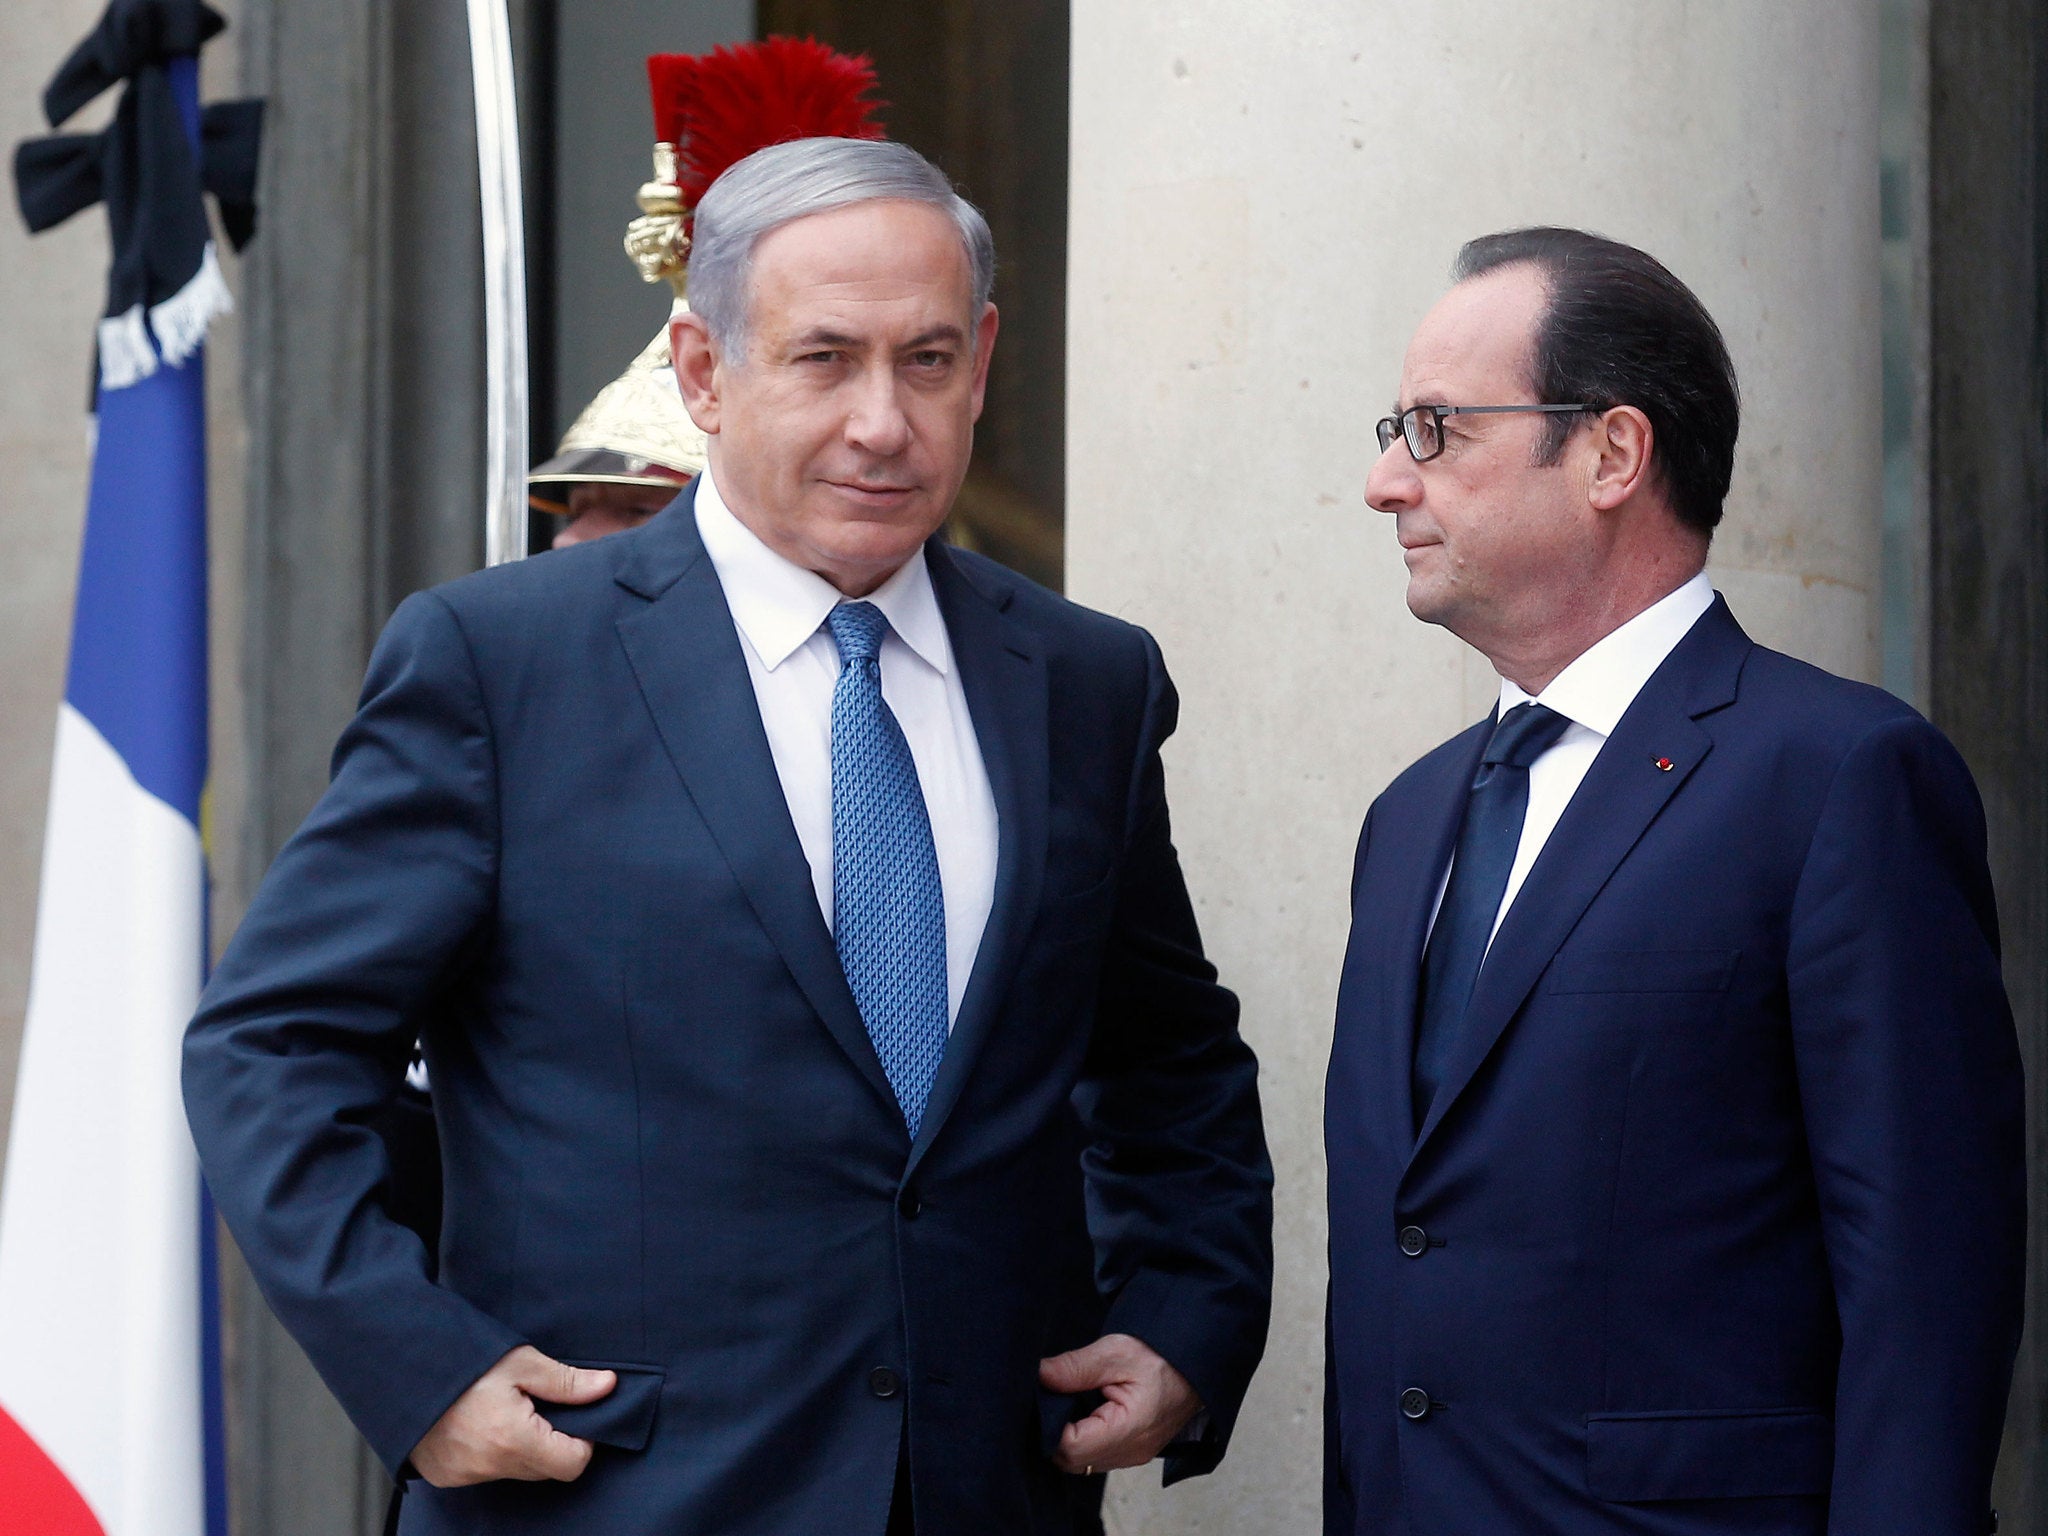 Israeli Prime Minister Benjamin Netanyahu with French President Francois Hollande ahead of the Paris march in solidarity with Charlie Hebdo